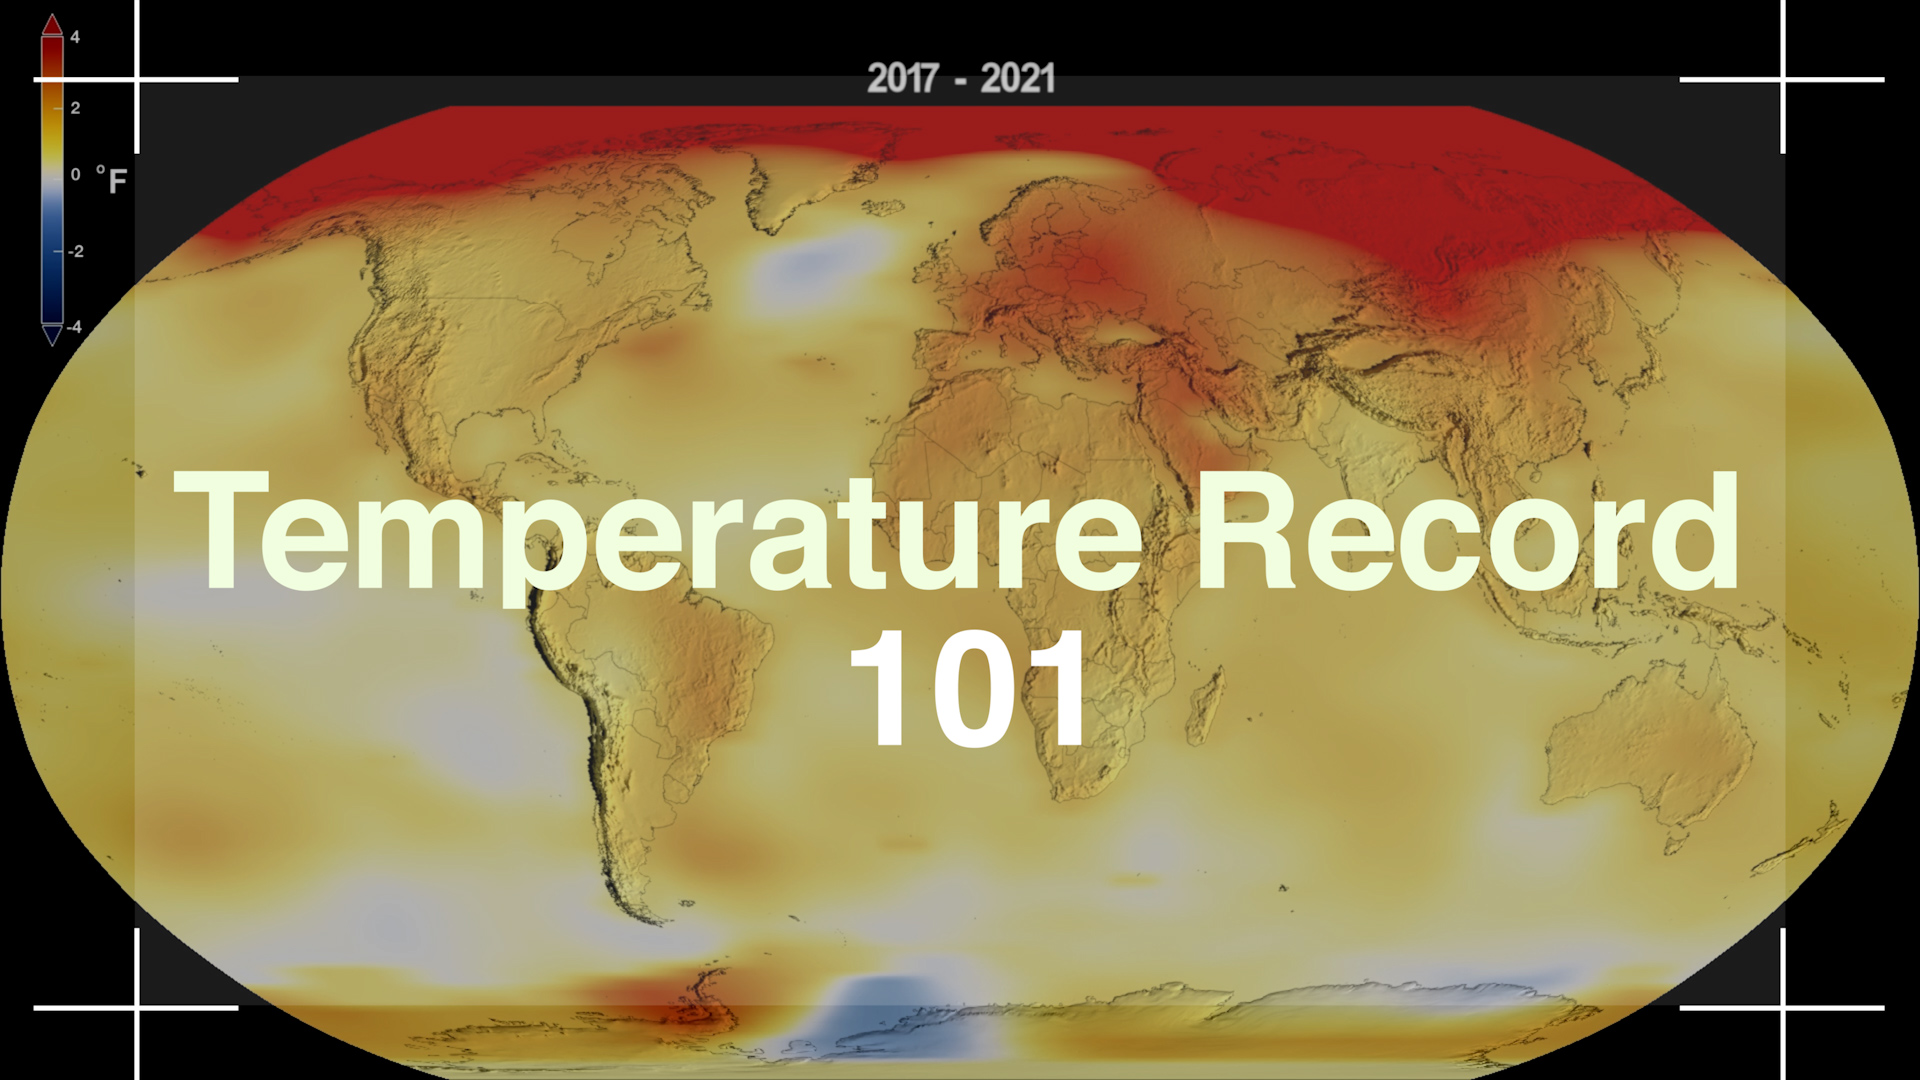 Preview Image for 2021 Tied for the Sixth Warmest Year on Record, NASA Finds